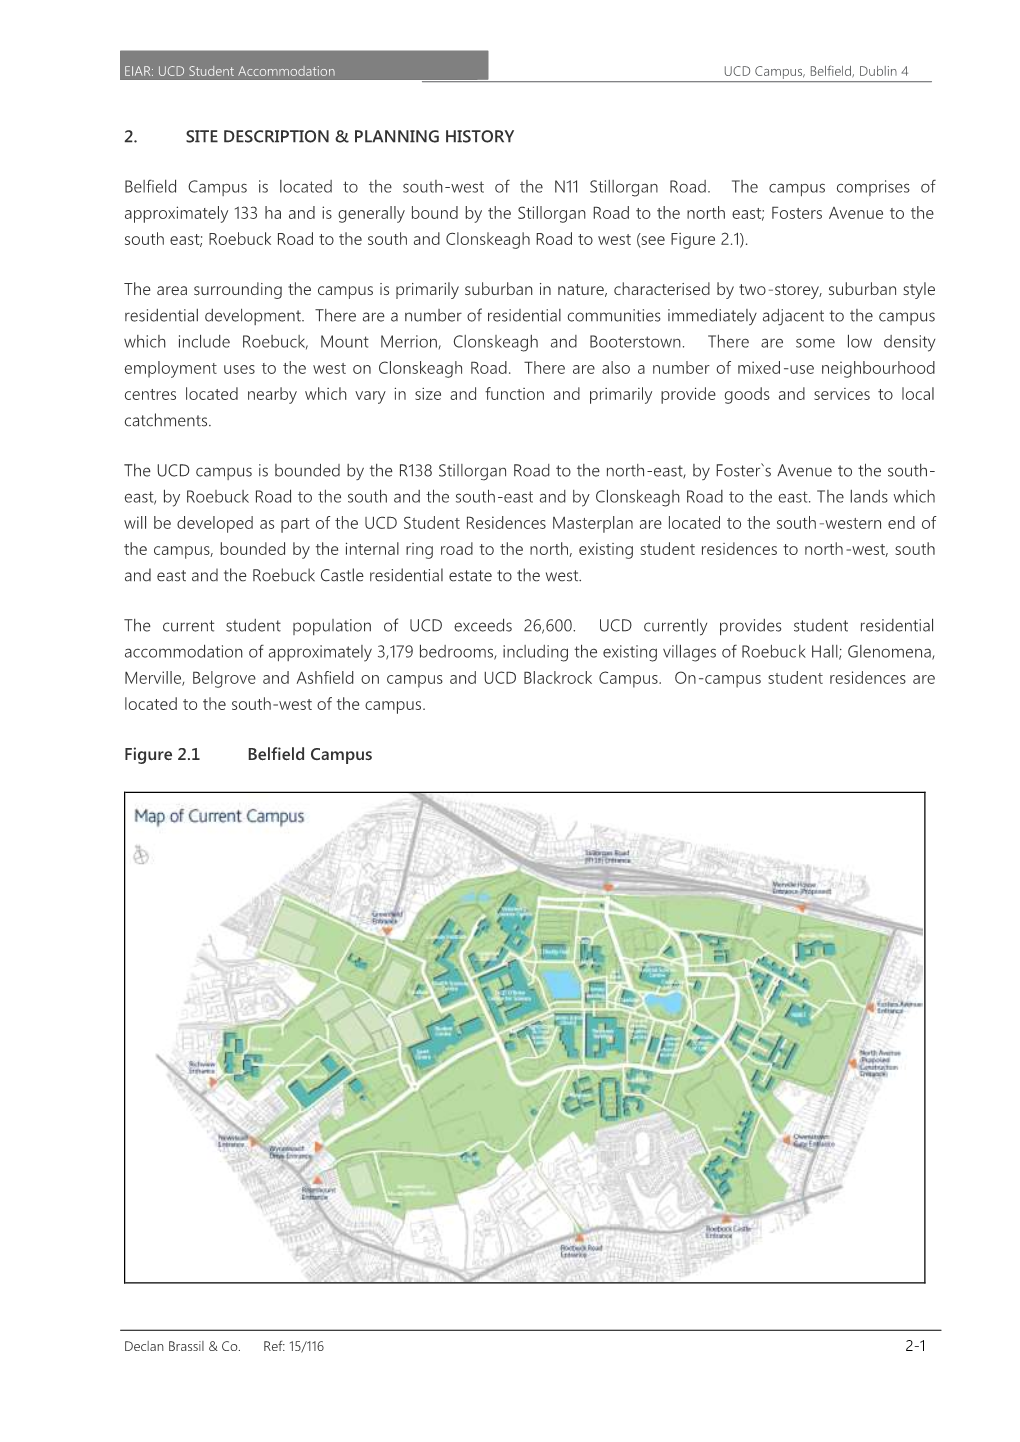 2. SITE DESCRIPTION & PLANNING HISTORY Belfield Campus Is Located to the South-West of the N11 Stillorgan Road. the Campu